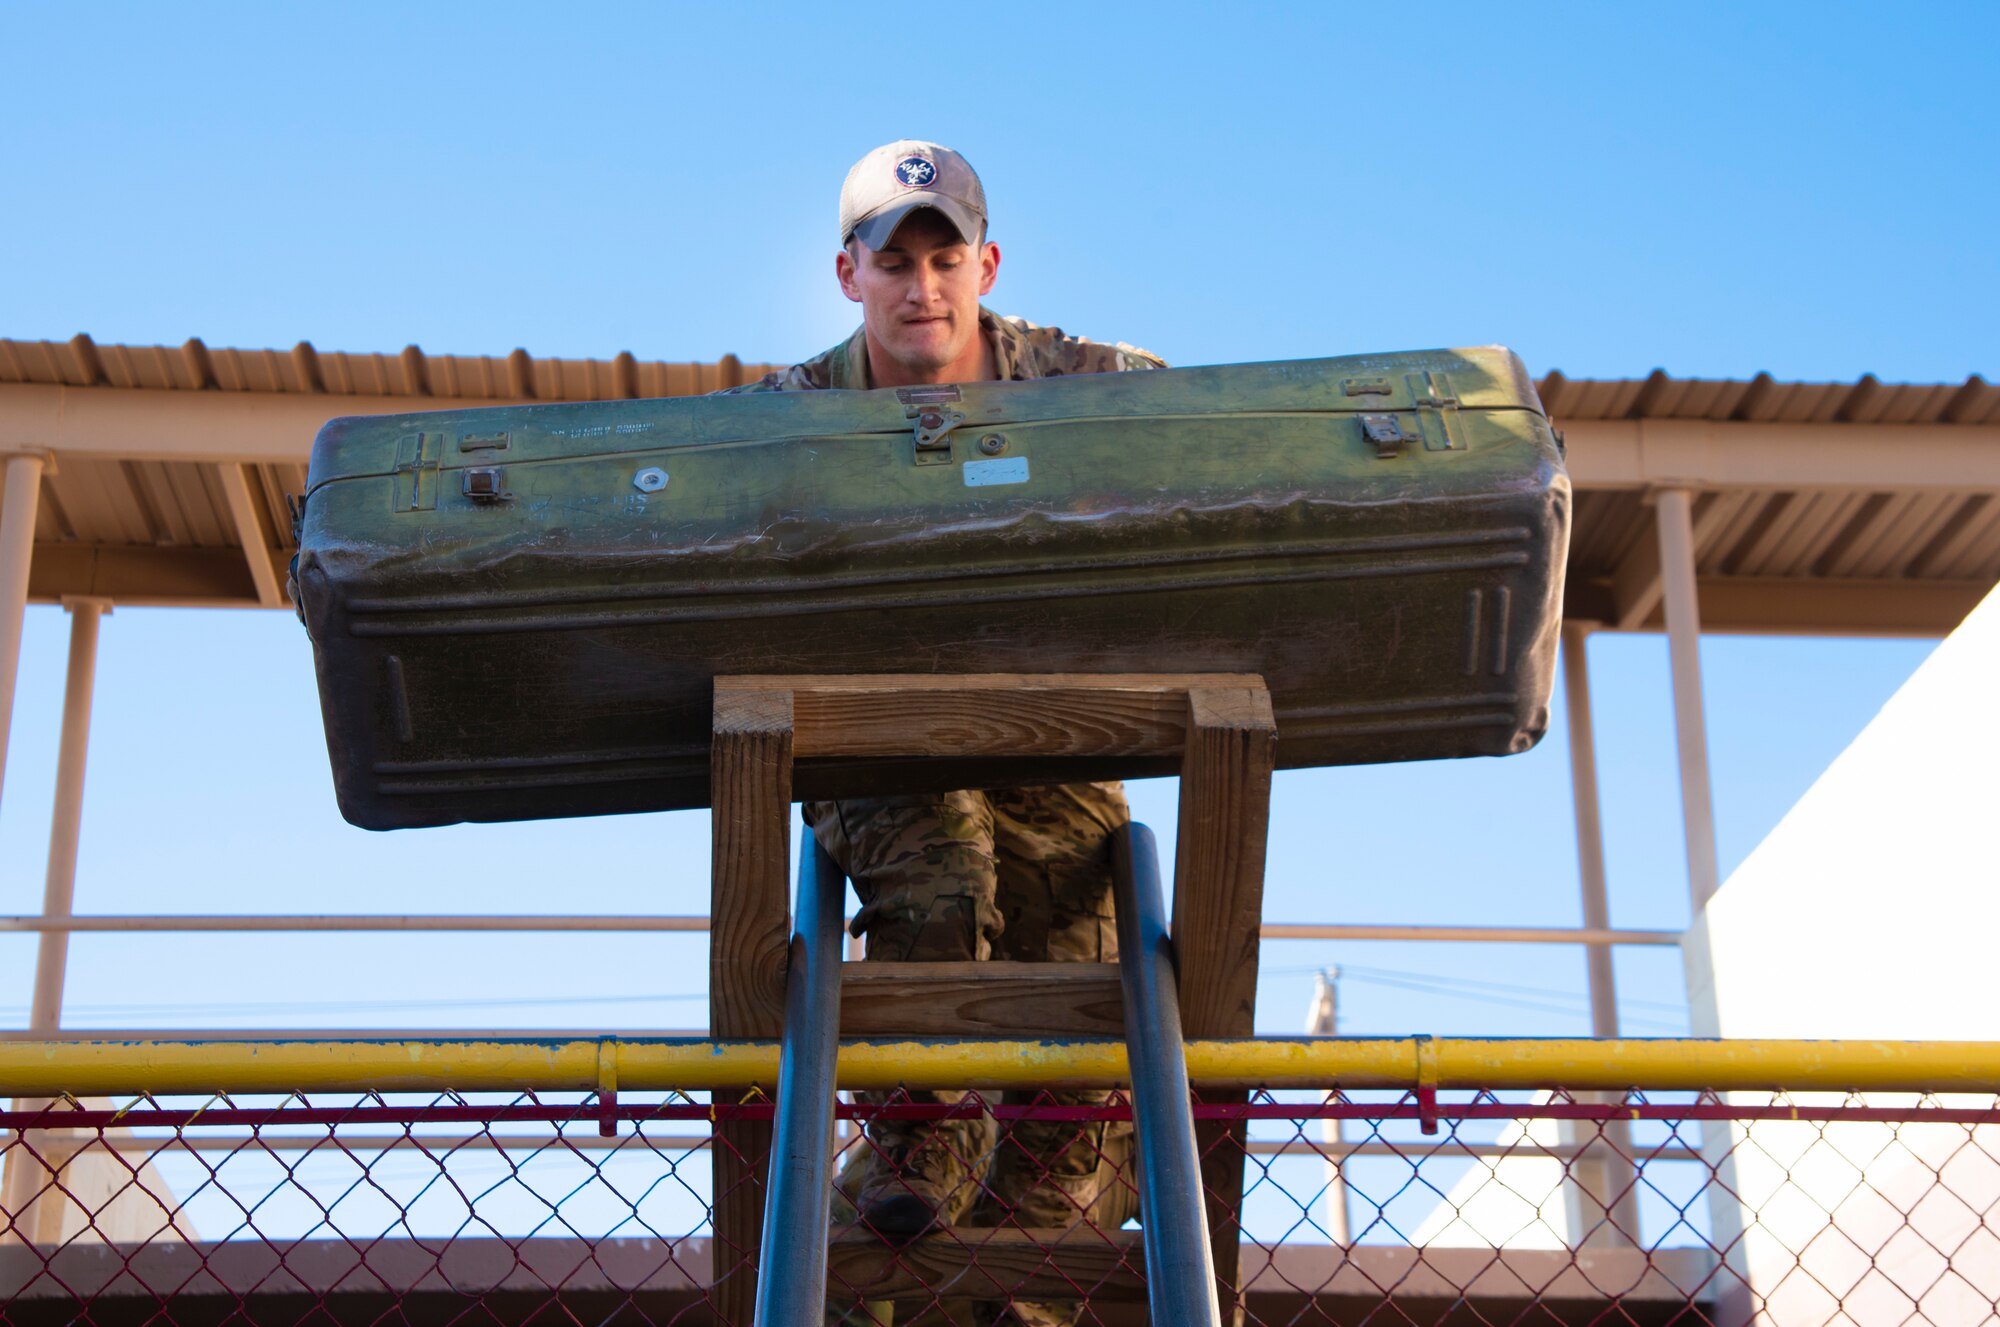 A U.S. Air Force Tactical Air Control Party specialist carries an equipment case over a fence during the 2021 Wraith Challenge, April 20, 2021, on Fort Bliss, Texas. Participants of the Wraith Challenge completed a leadership course where they solved problems like how to carry equipment and personnel over obstacles.  (U.S. Air Force photo by Airman 1st Class Jessica Sanchez)